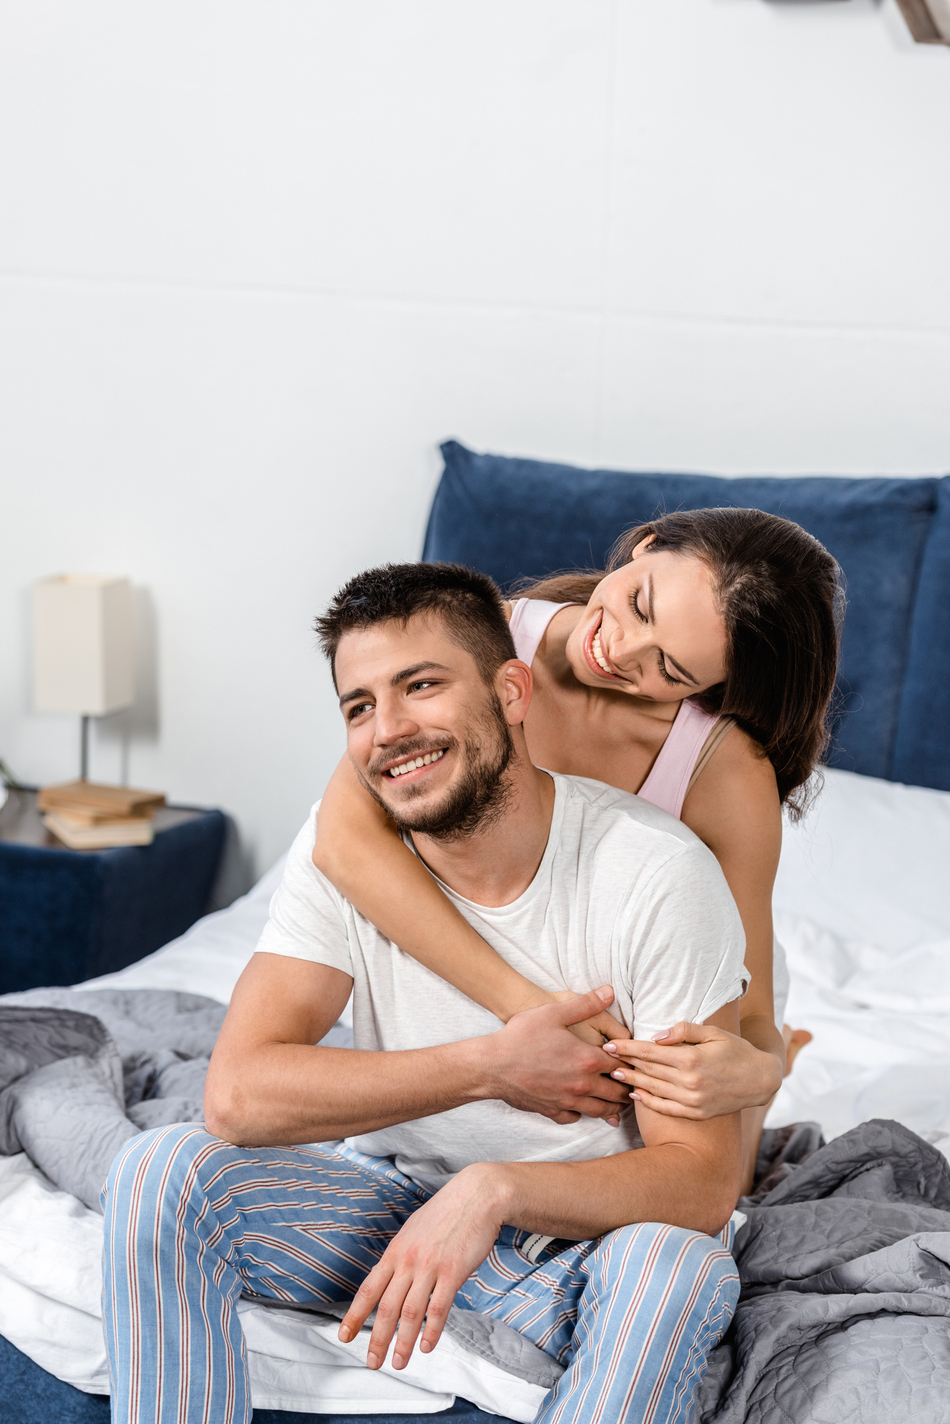 6 Reasons Women Love Men Who Get a Vasectomy